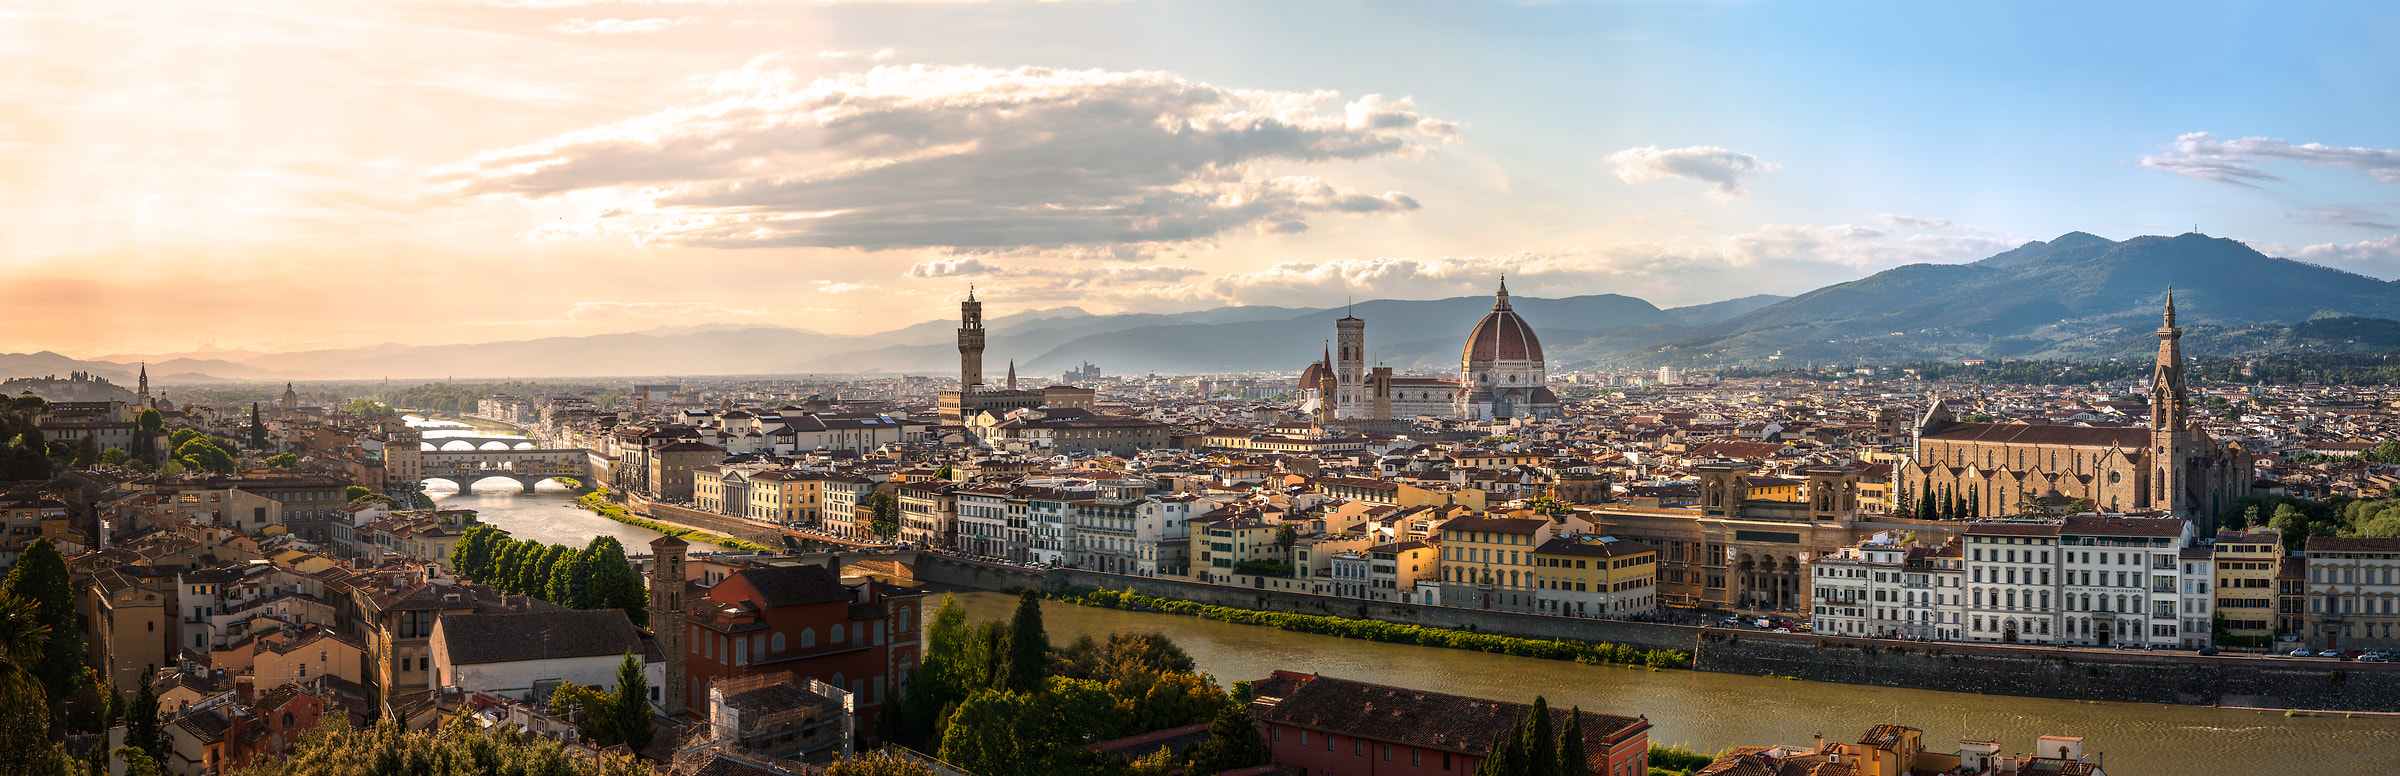 917 megapixels! A very high resolution, large-format VAST photo print of Florence, Italy at Sunset with the Cathedral of Santa Maria del Fiore, The Palazzo Vecchio, and the Arno river; fine art cityscape landscape photograph created by Justin Katz in Florence, Tuscany, Italy